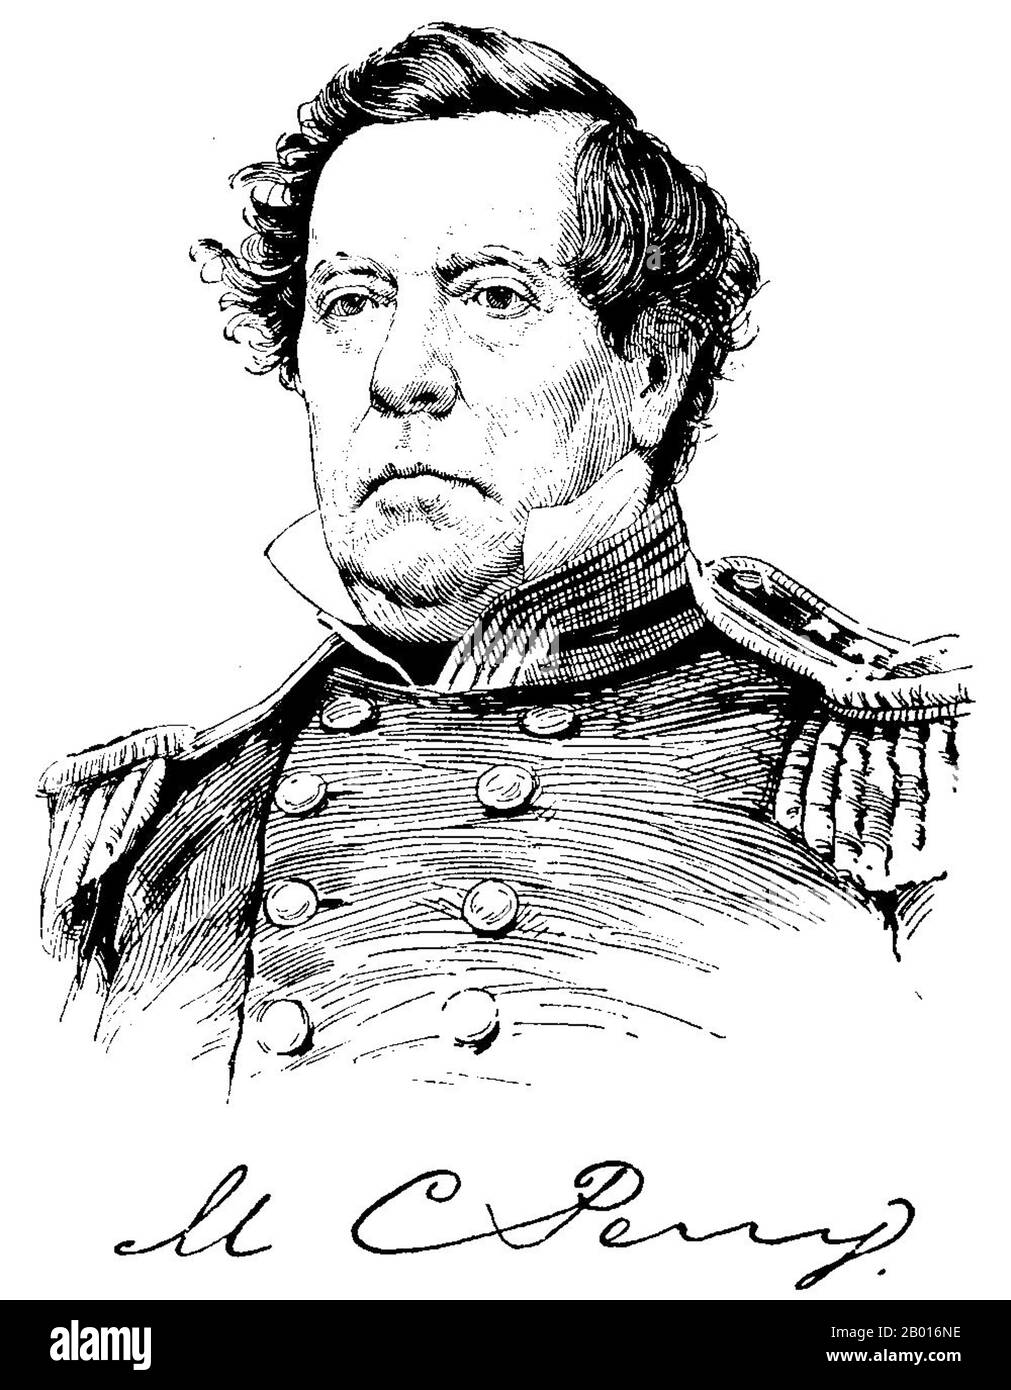 USA: Commodore Matthew Calbraith Perry (10 April 1794 - 4 March 1858). Portrait, c. 1858.  Matthew Calbraith Perry was a Commodore of the U.S. Navy who compelled the opening of Japan to the West with the Convention of Kanagawa in 1854, when he threatened to bombard Edo (Tokyo) with his ships should they resist. Perry had commanded ships in several wars, including the War of 1812 and the Mexican-American War (1846-1848). His advocacy for the modernisation of the U.S. Navy led to him being called 'The Father of the Steam Navy'. Stock Photo